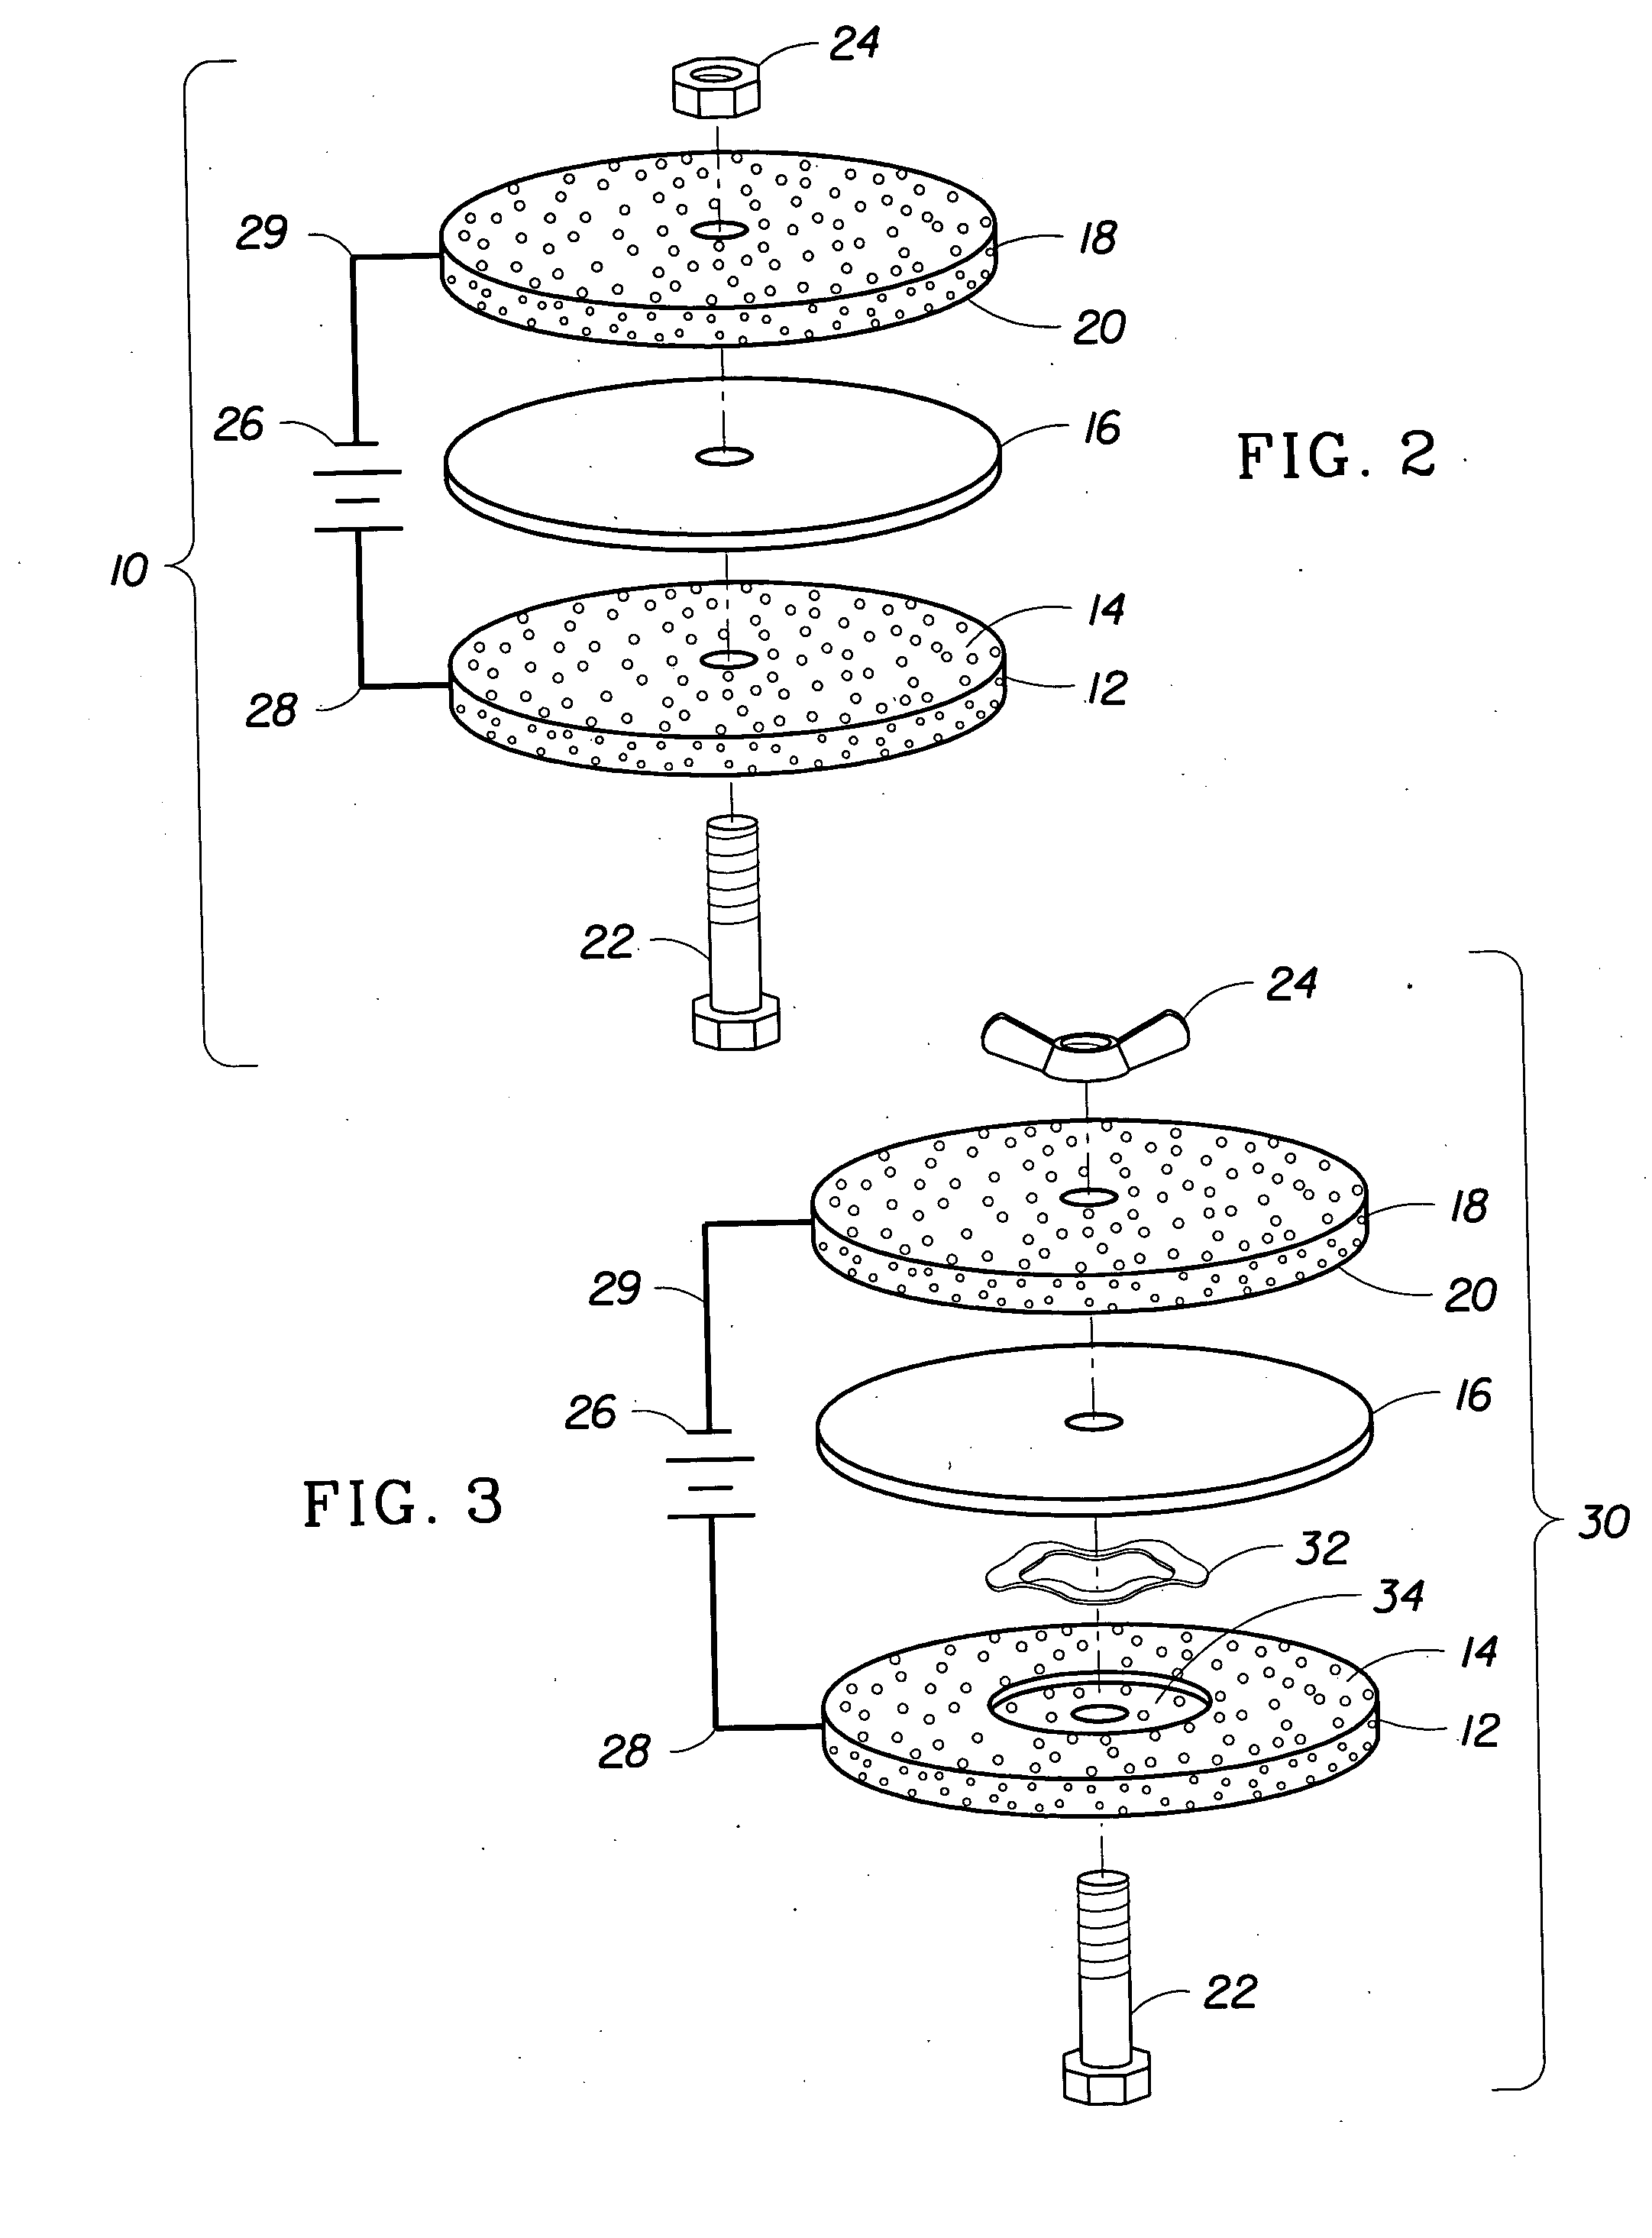 Electrochemical apparatus with retractable electrode